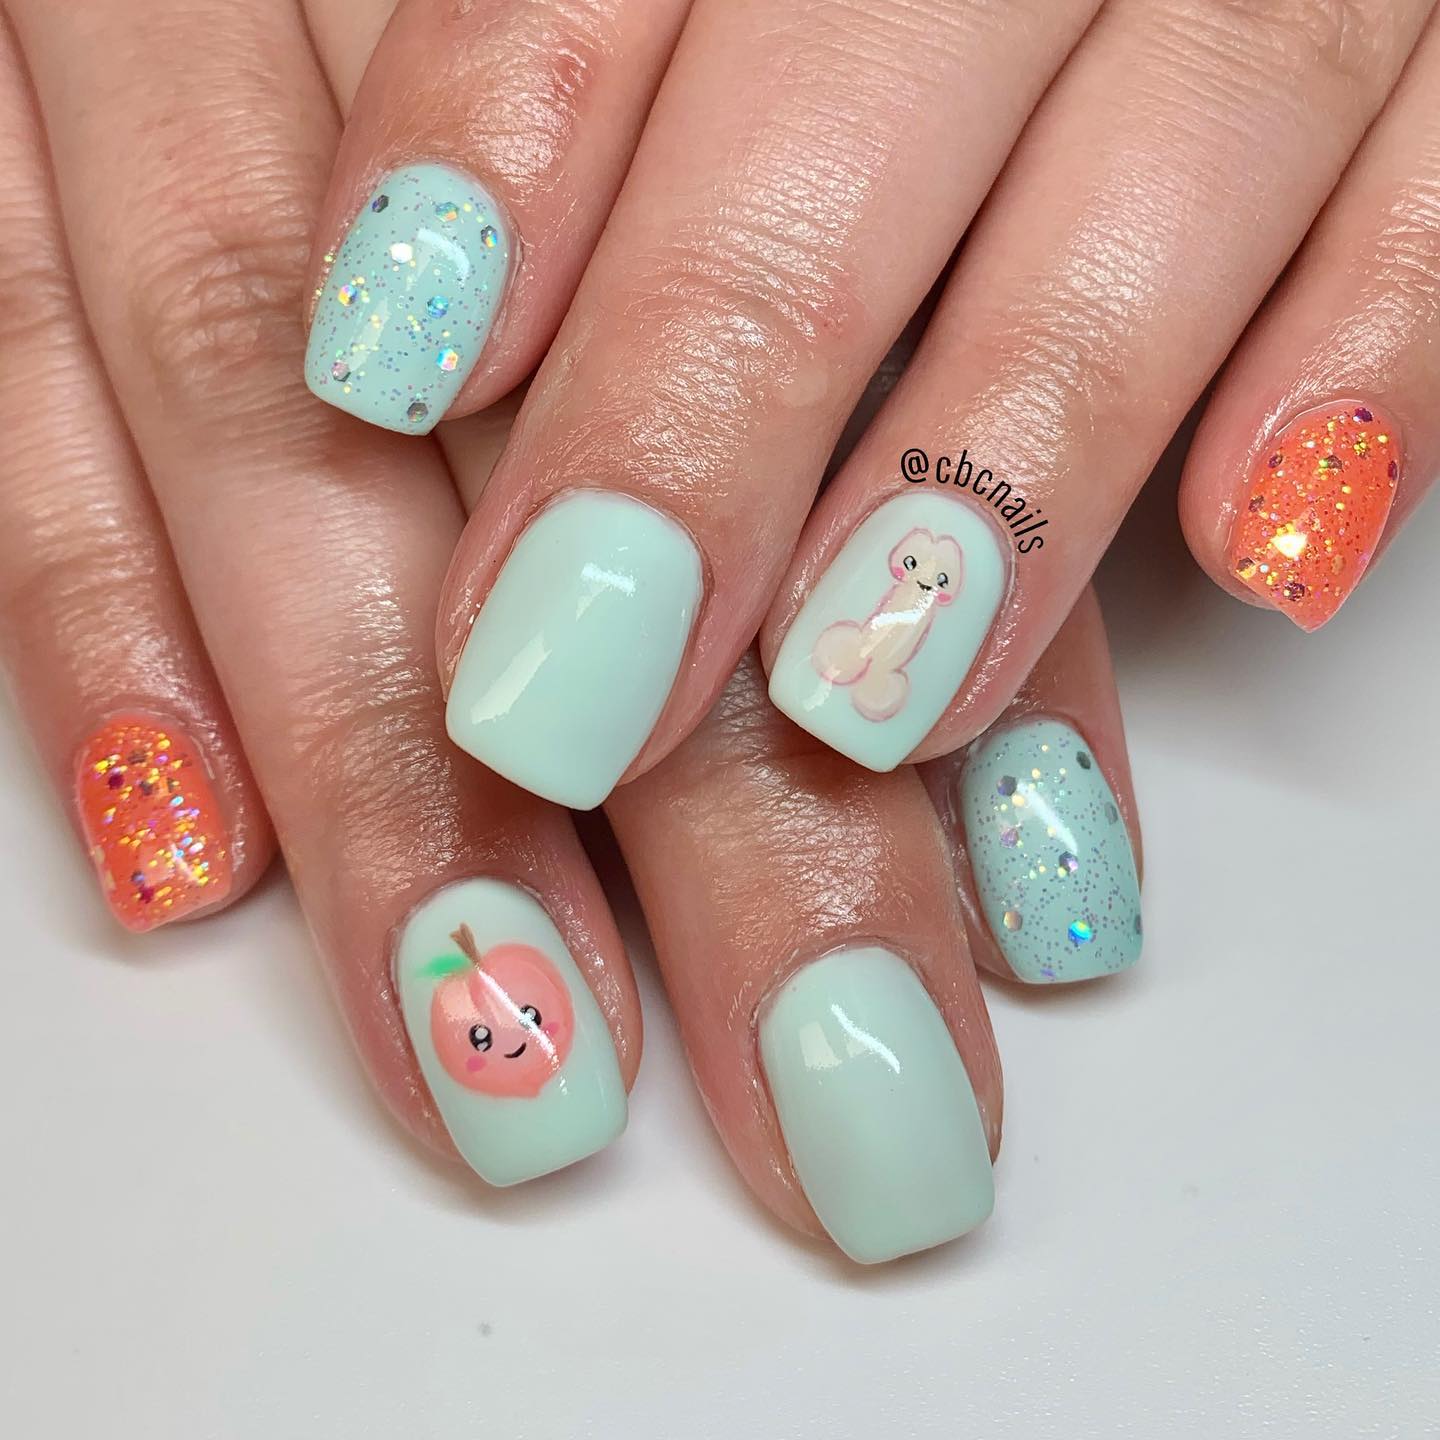 Baby blue and light orange nail polishes when combined with a peach and penis will take your nails to a new level!